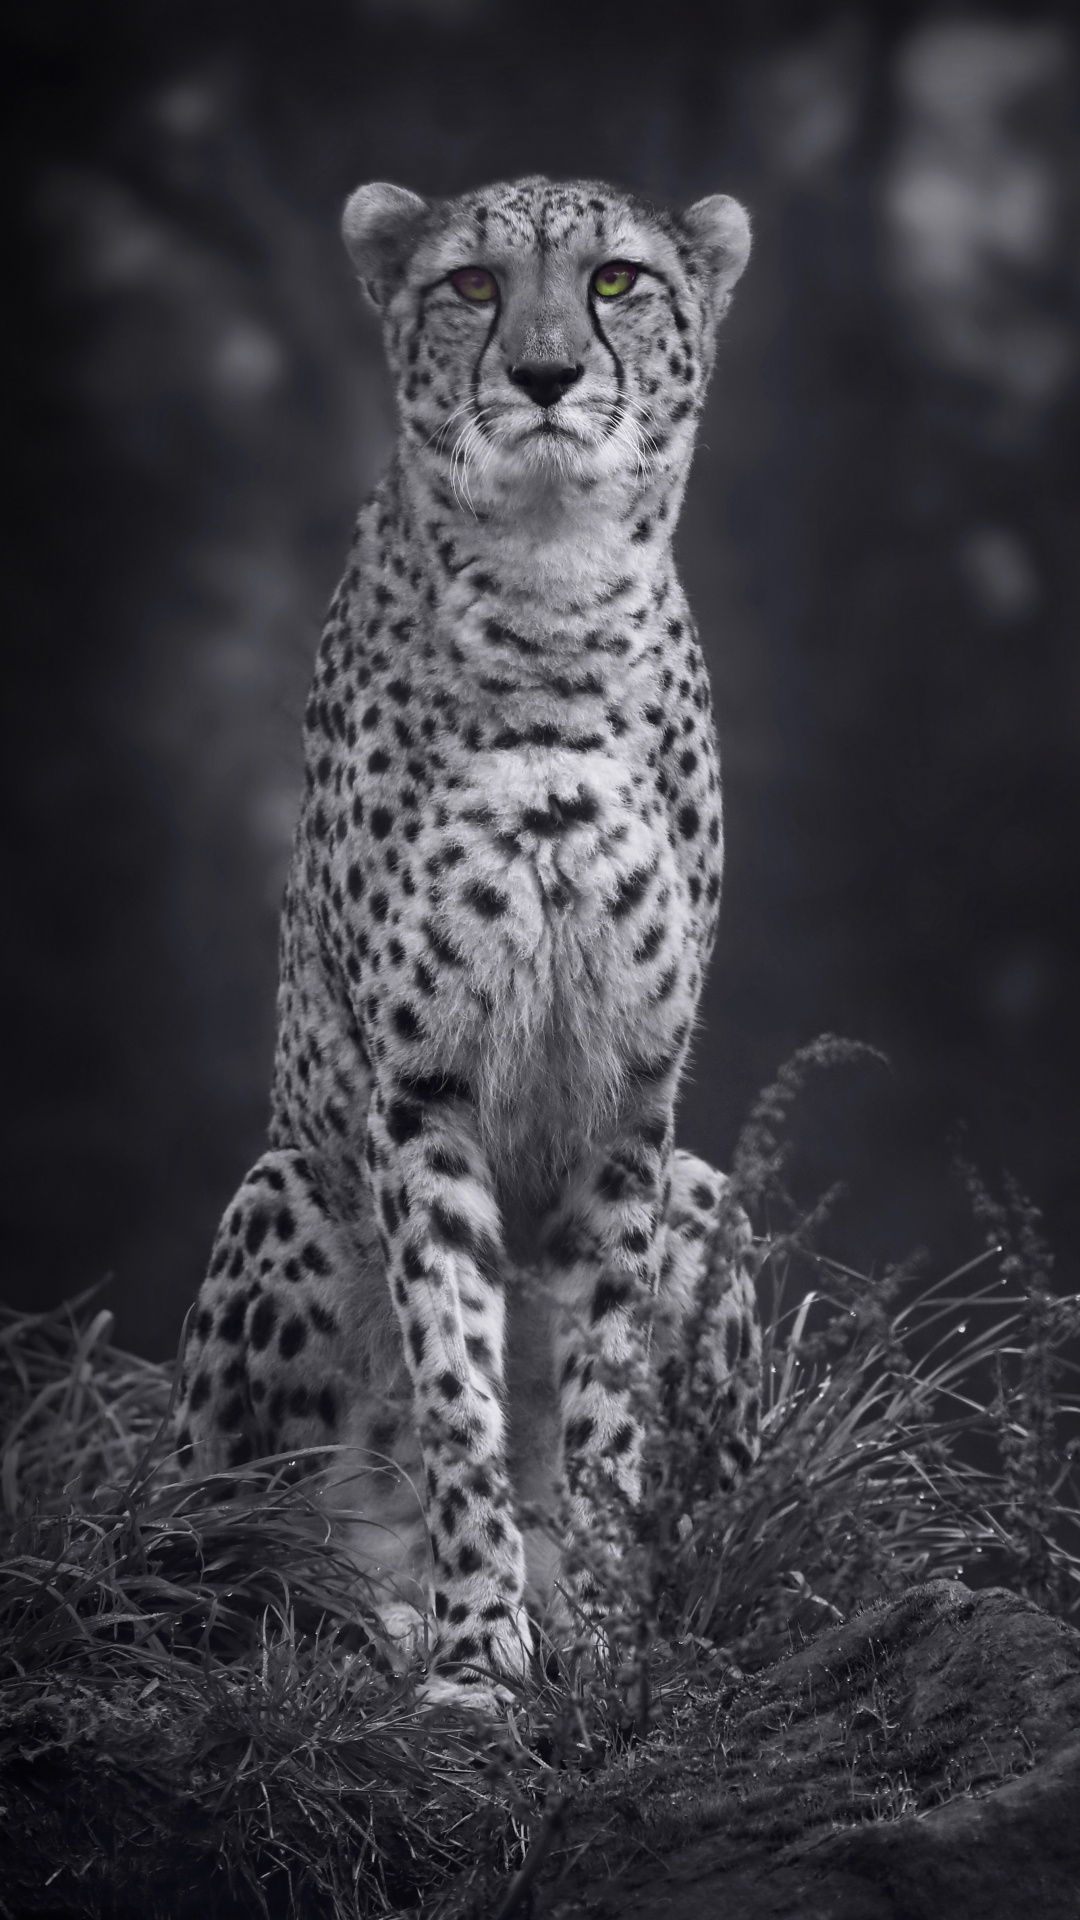 Grayscale Photo of Cheetah on Grass. Wallpaper in 1080x1920 Resolution